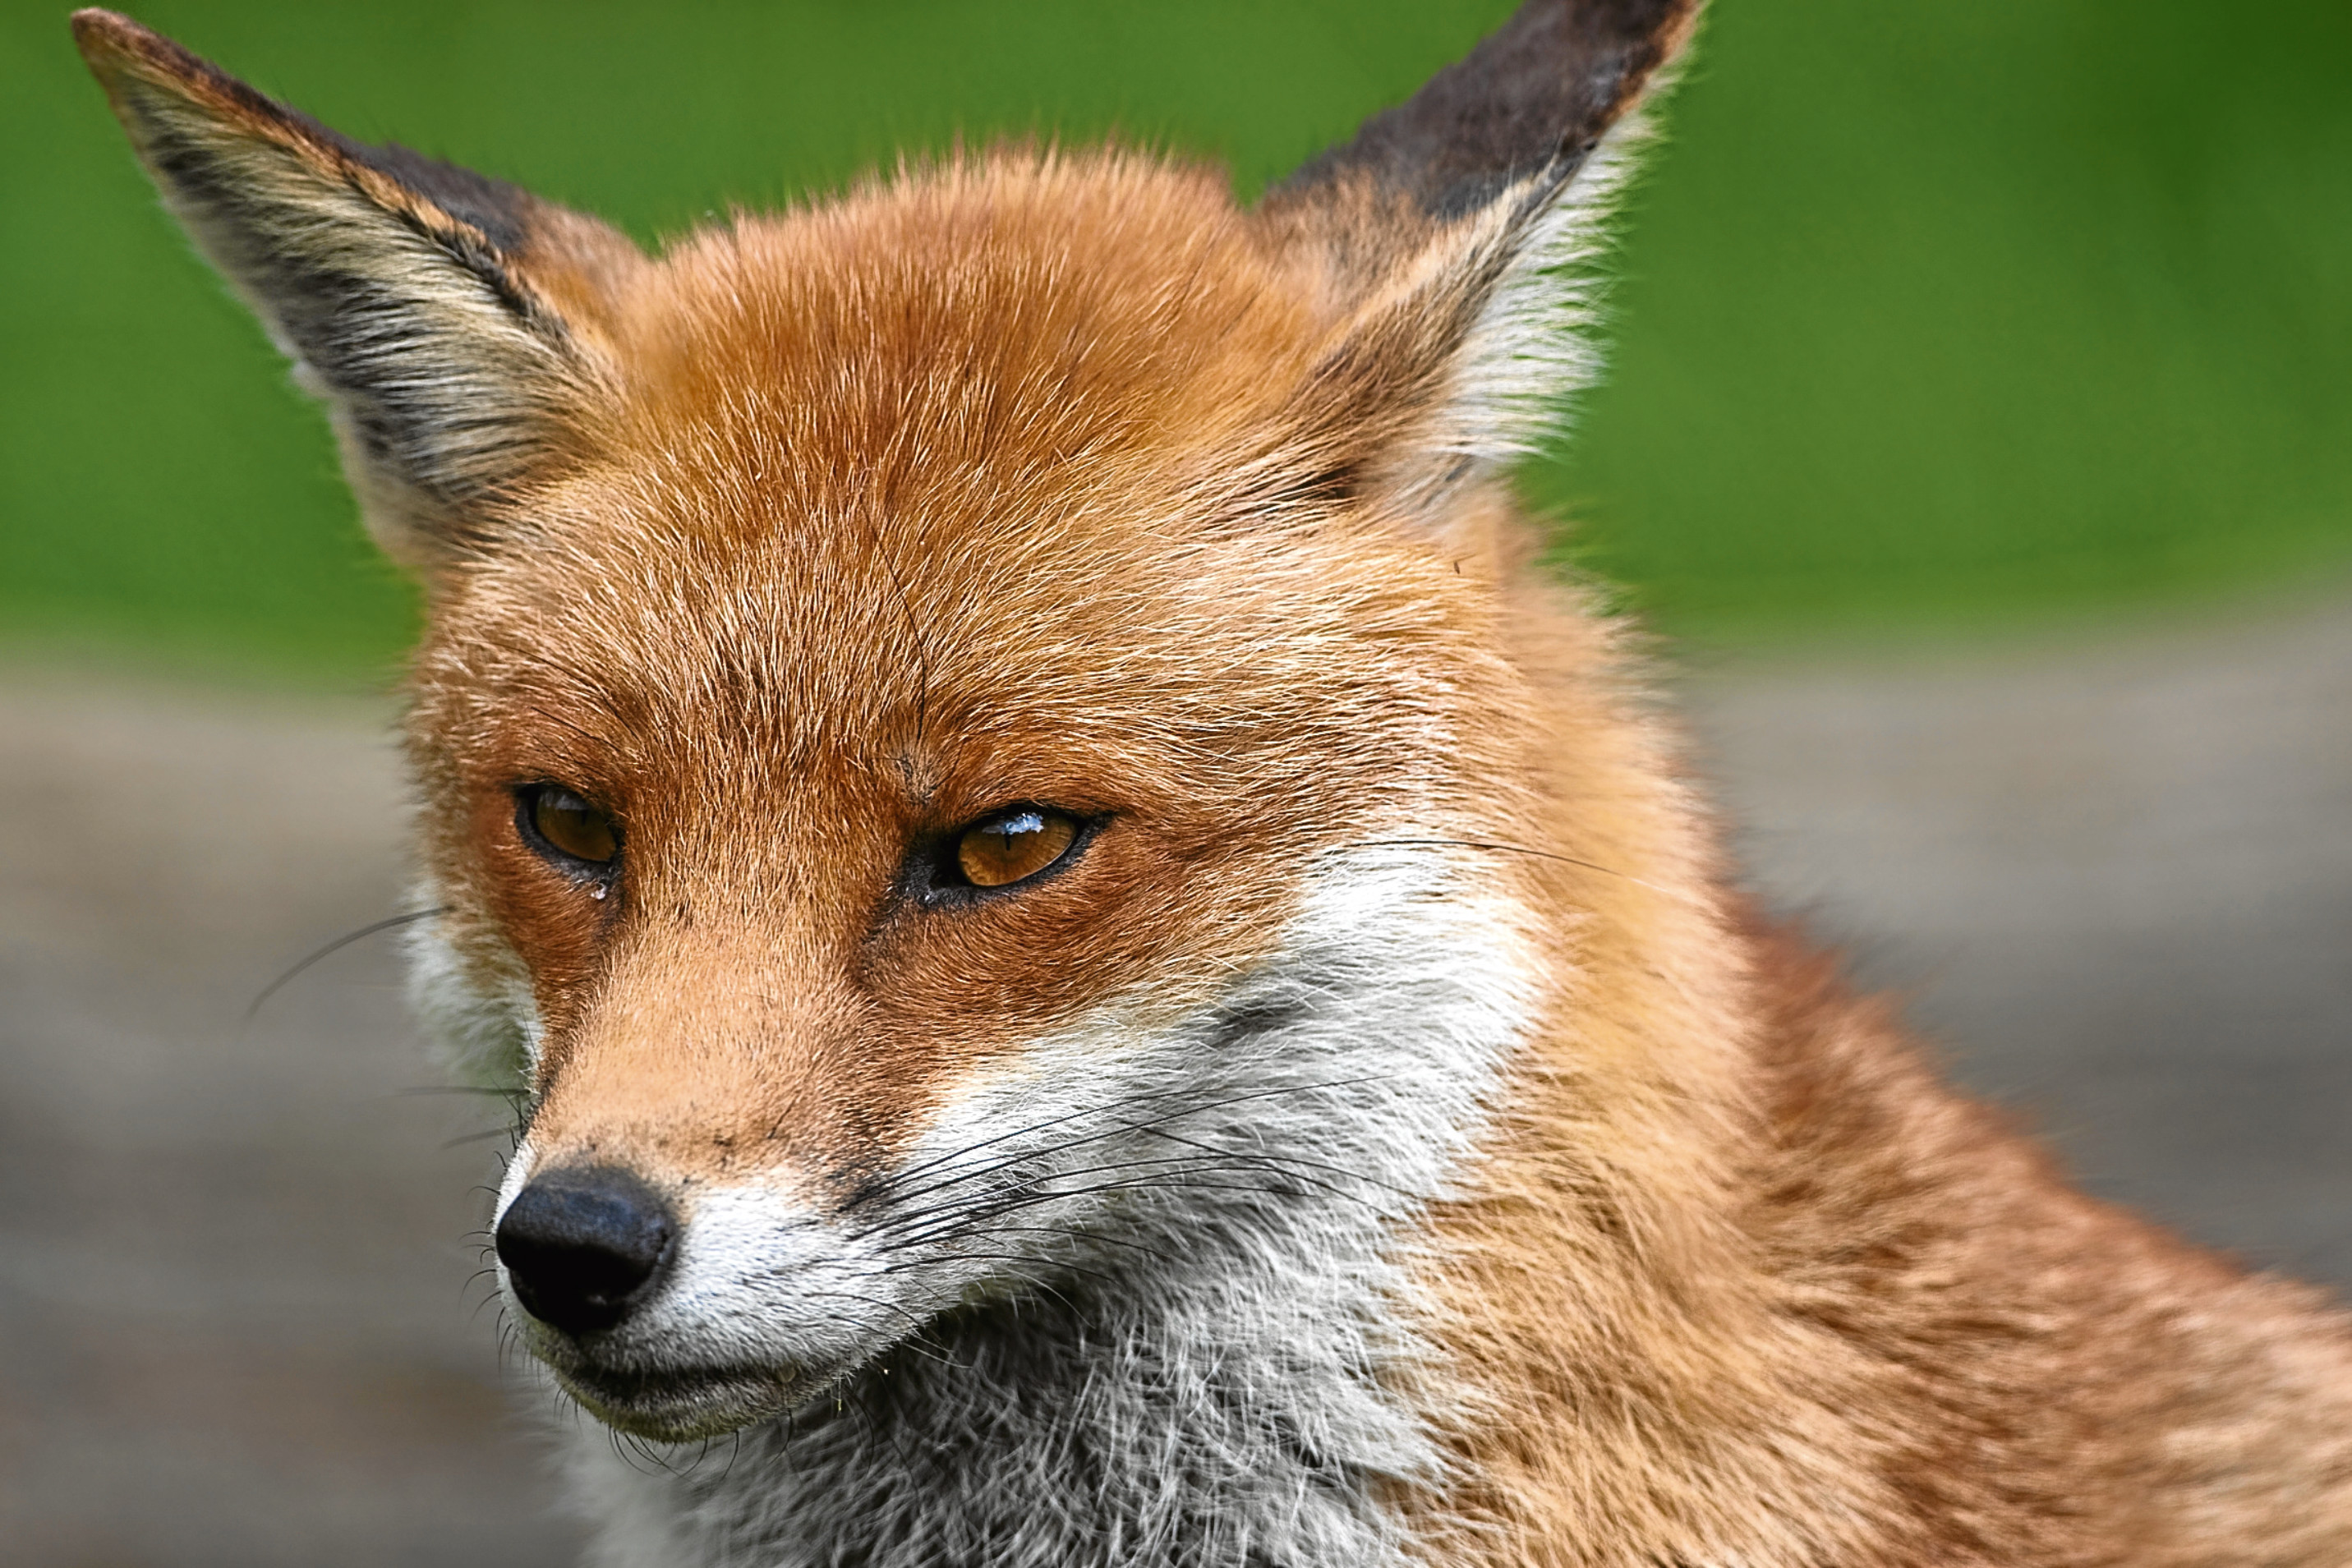 Jim has an idea to highlight the plight of the red fox across the UK: An eight-hour, prime-time series called Red Planet.